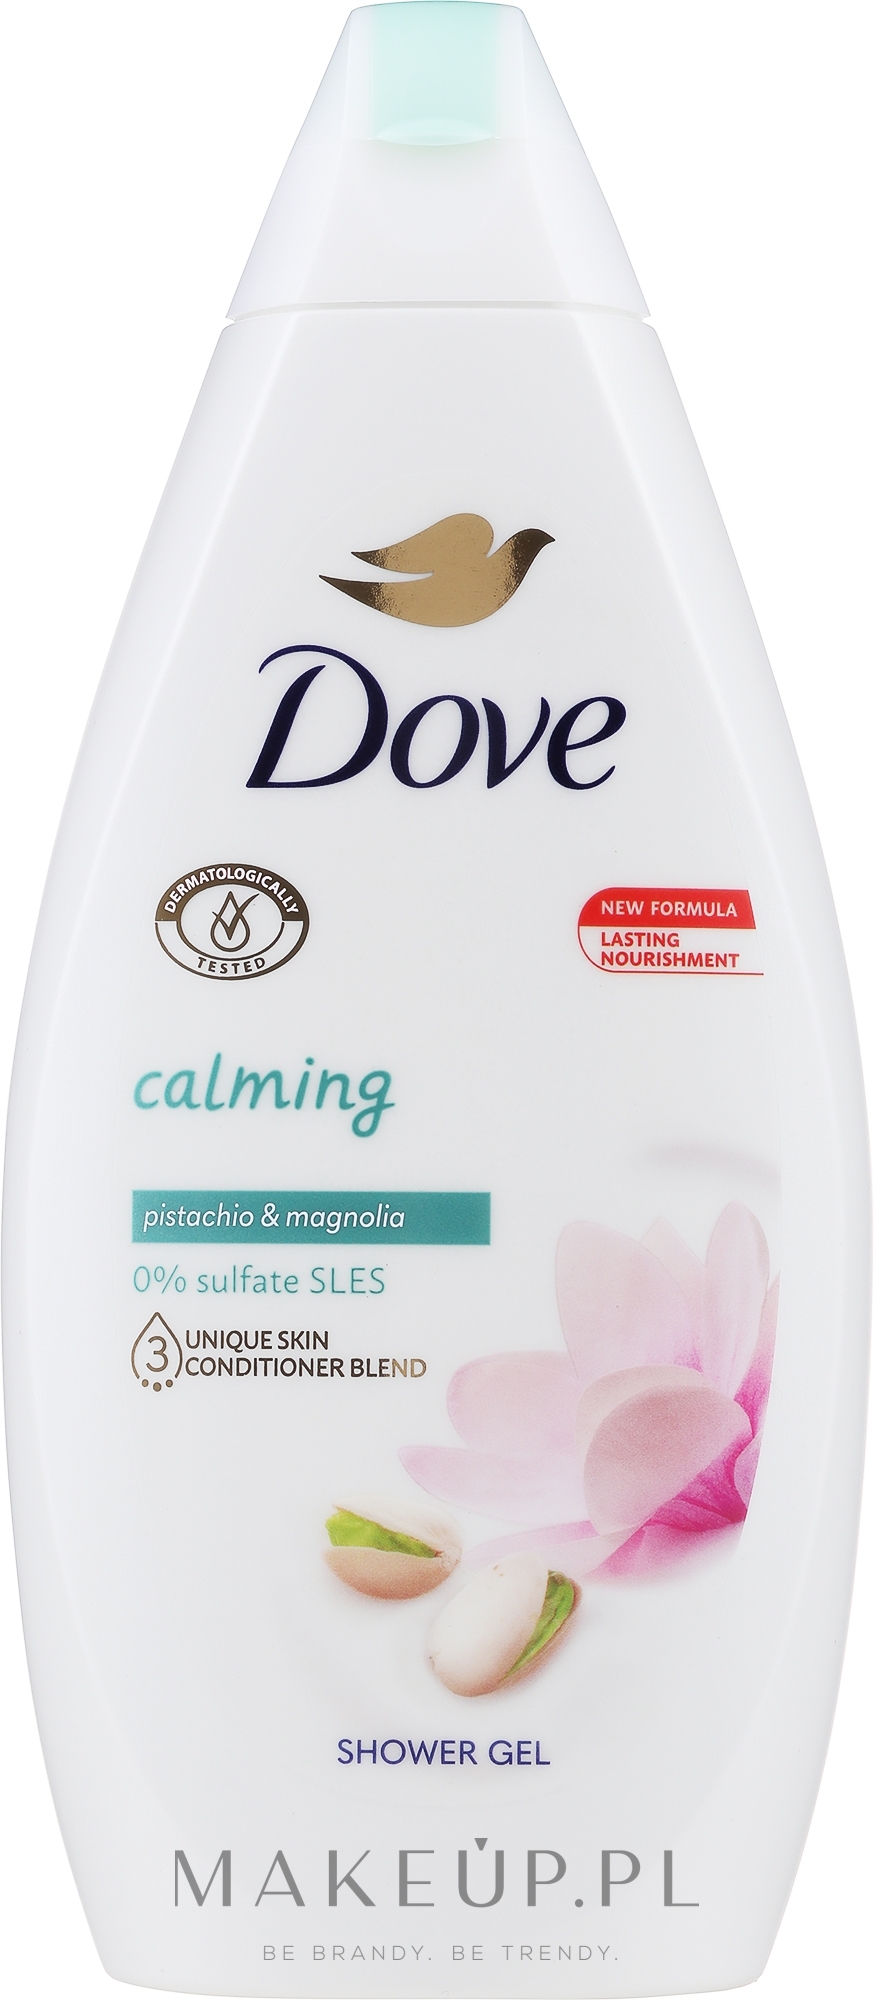 dove purely pampering pistacja